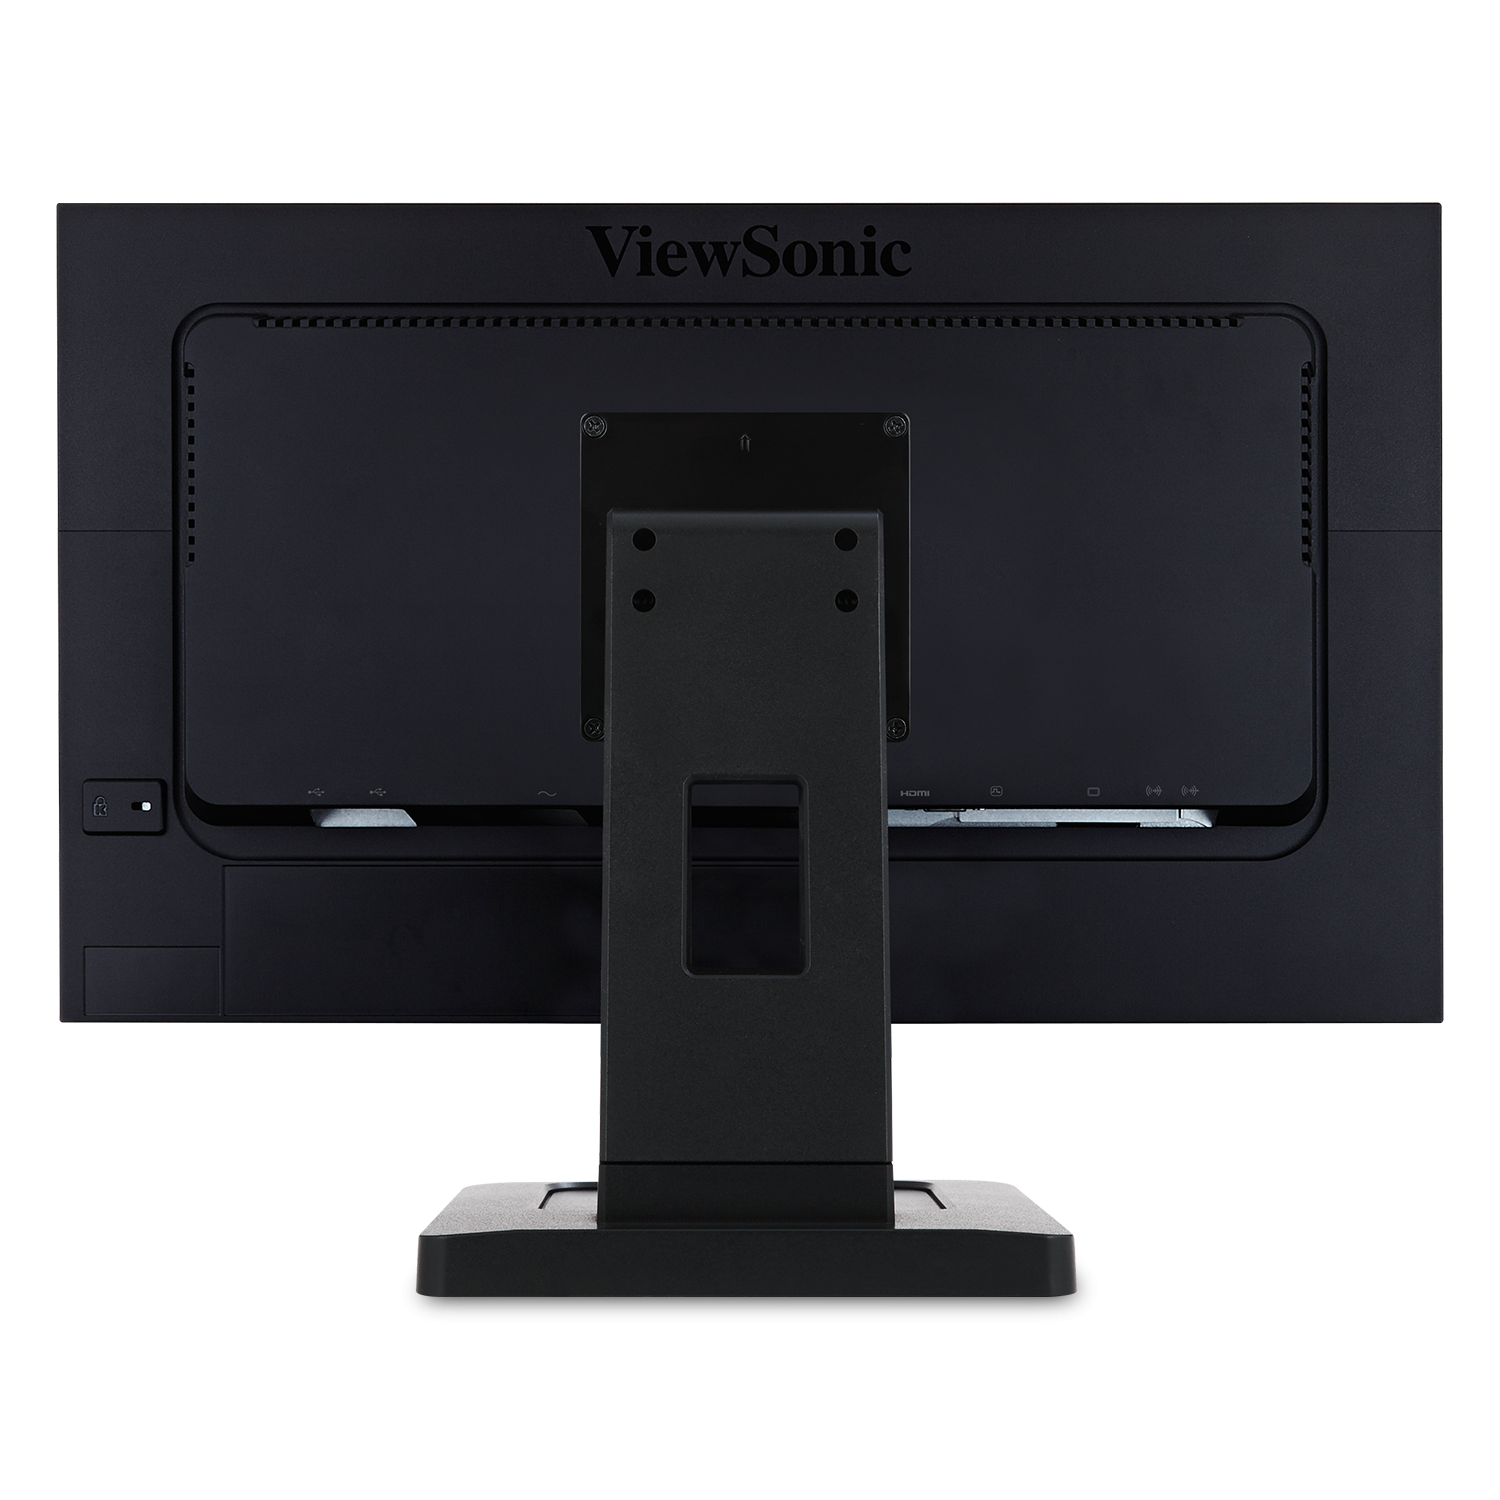 ViewSonic TD2421 24 Inch 1080p Dual-Point Optical Touch Screen Monitor with HDMI and DVI - image 4 of 6